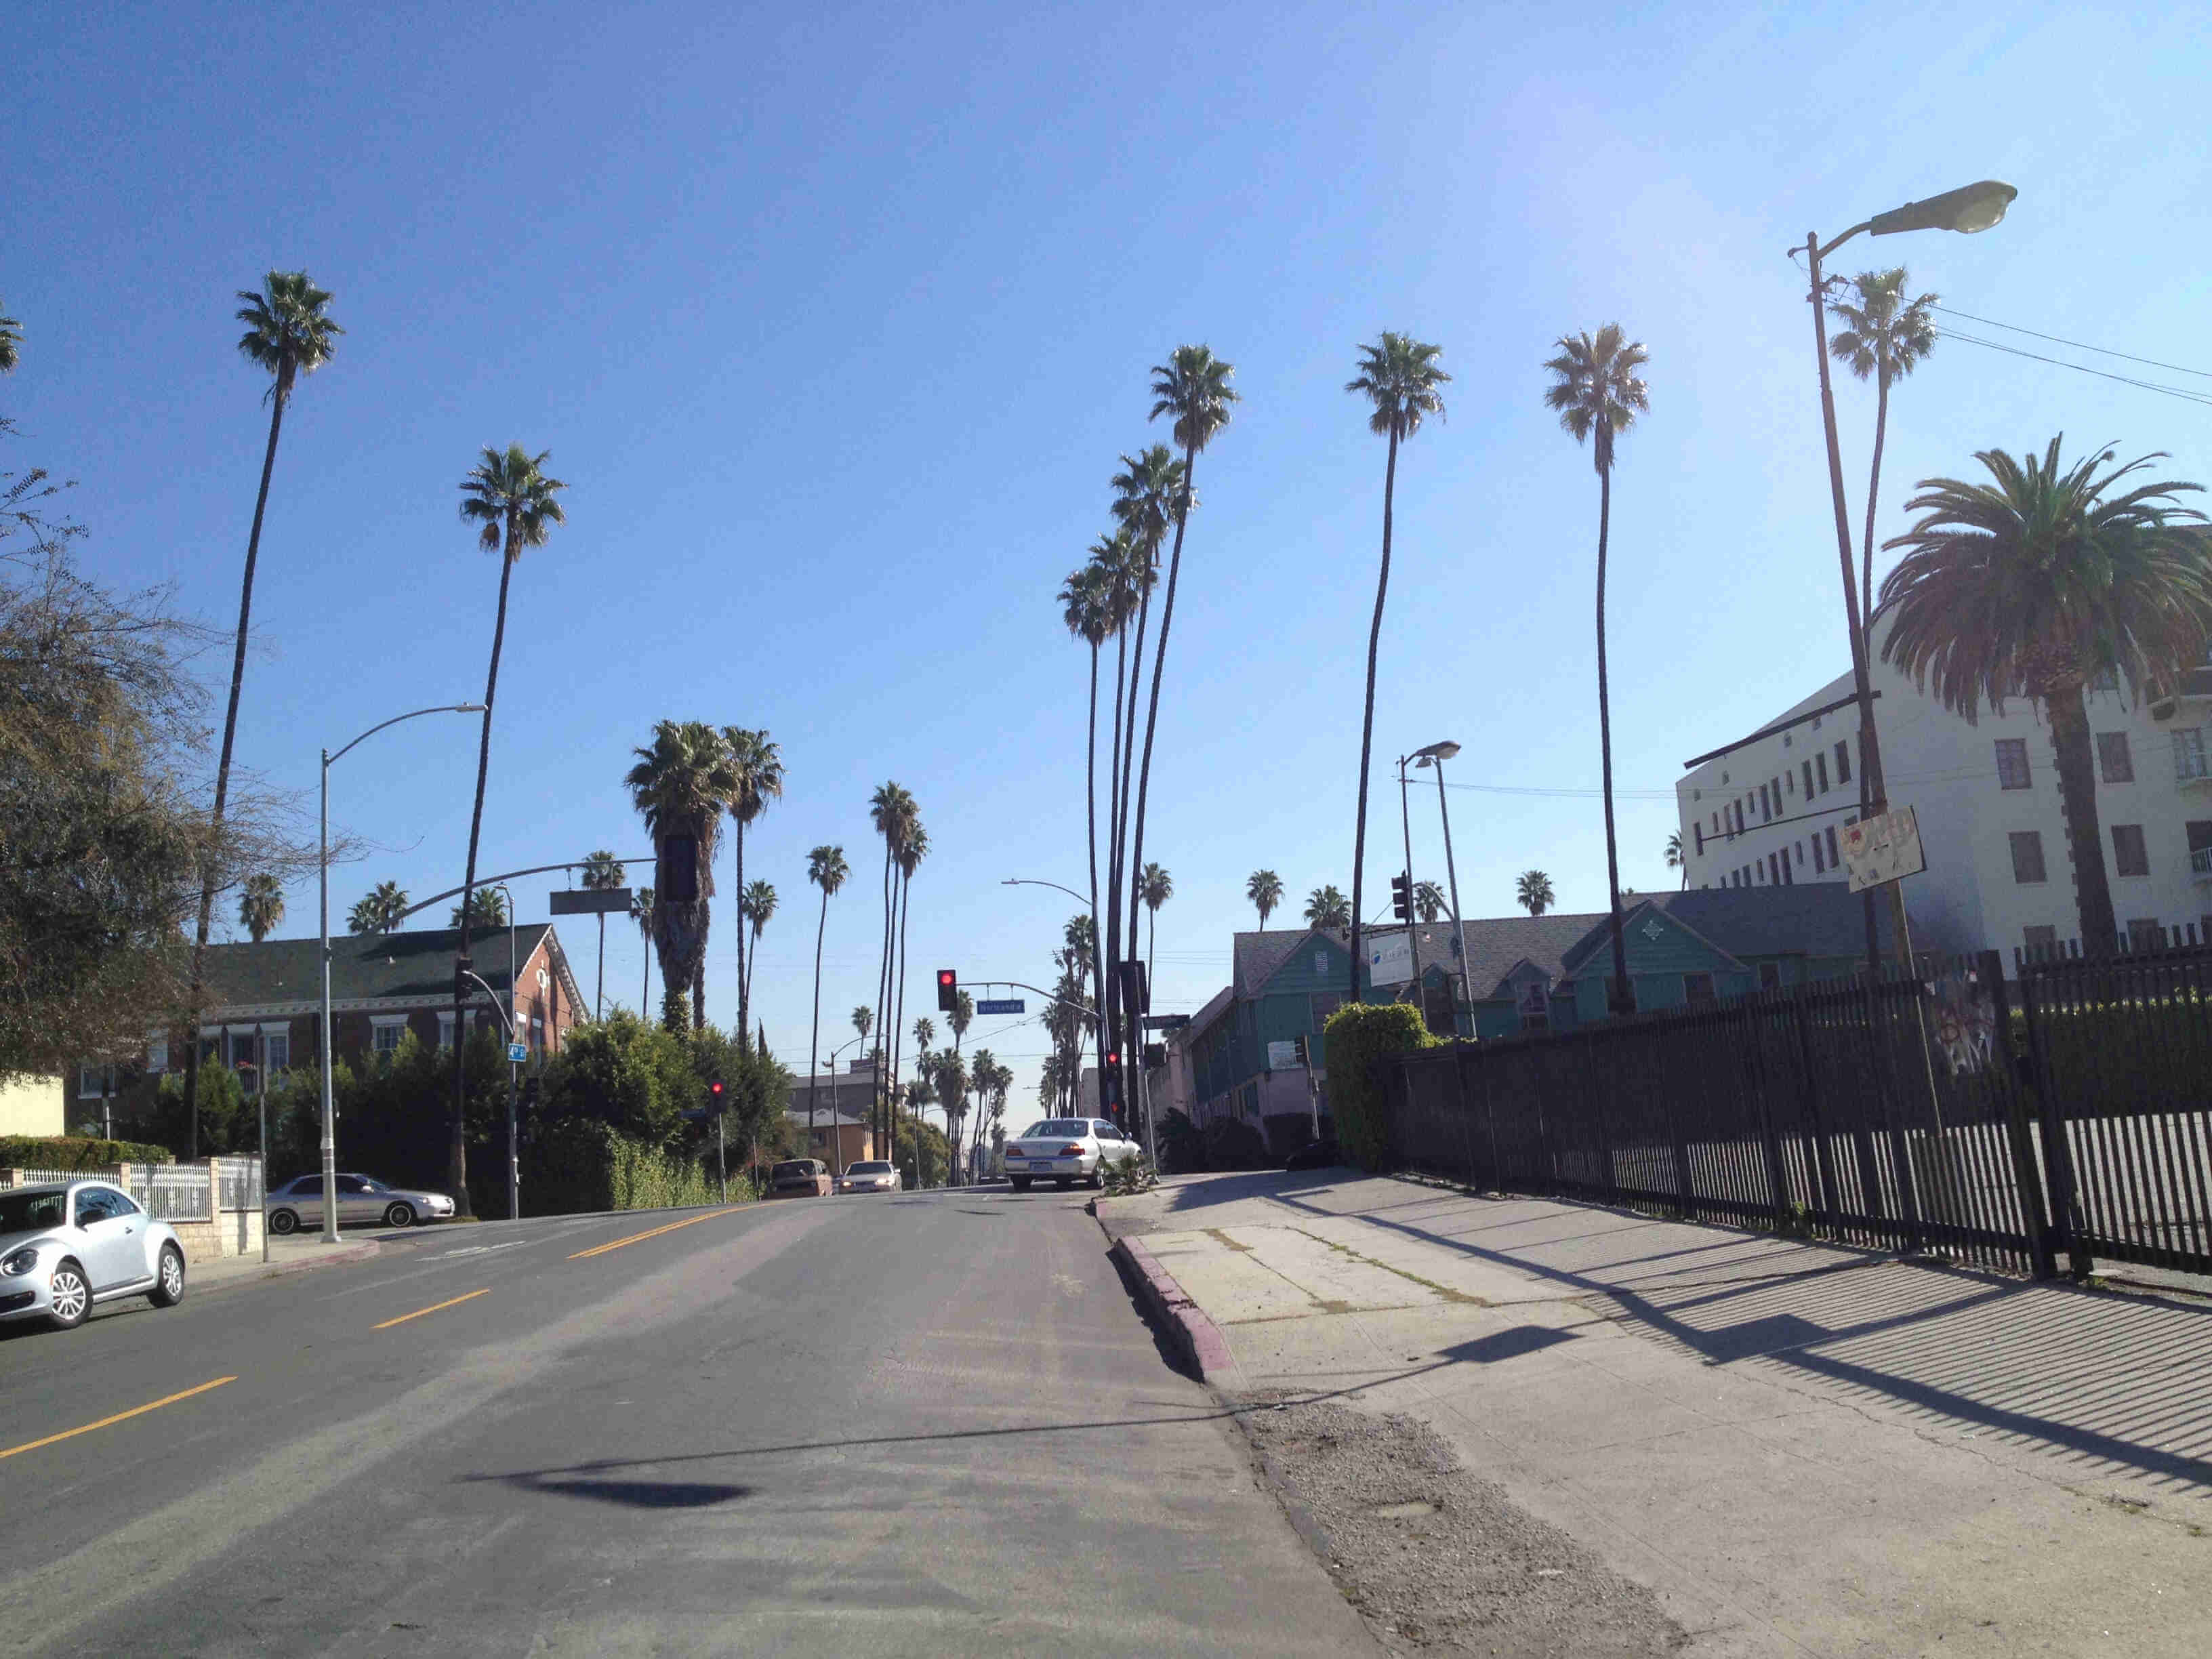 View up a city street hill, with palm trees and buildings on the sides